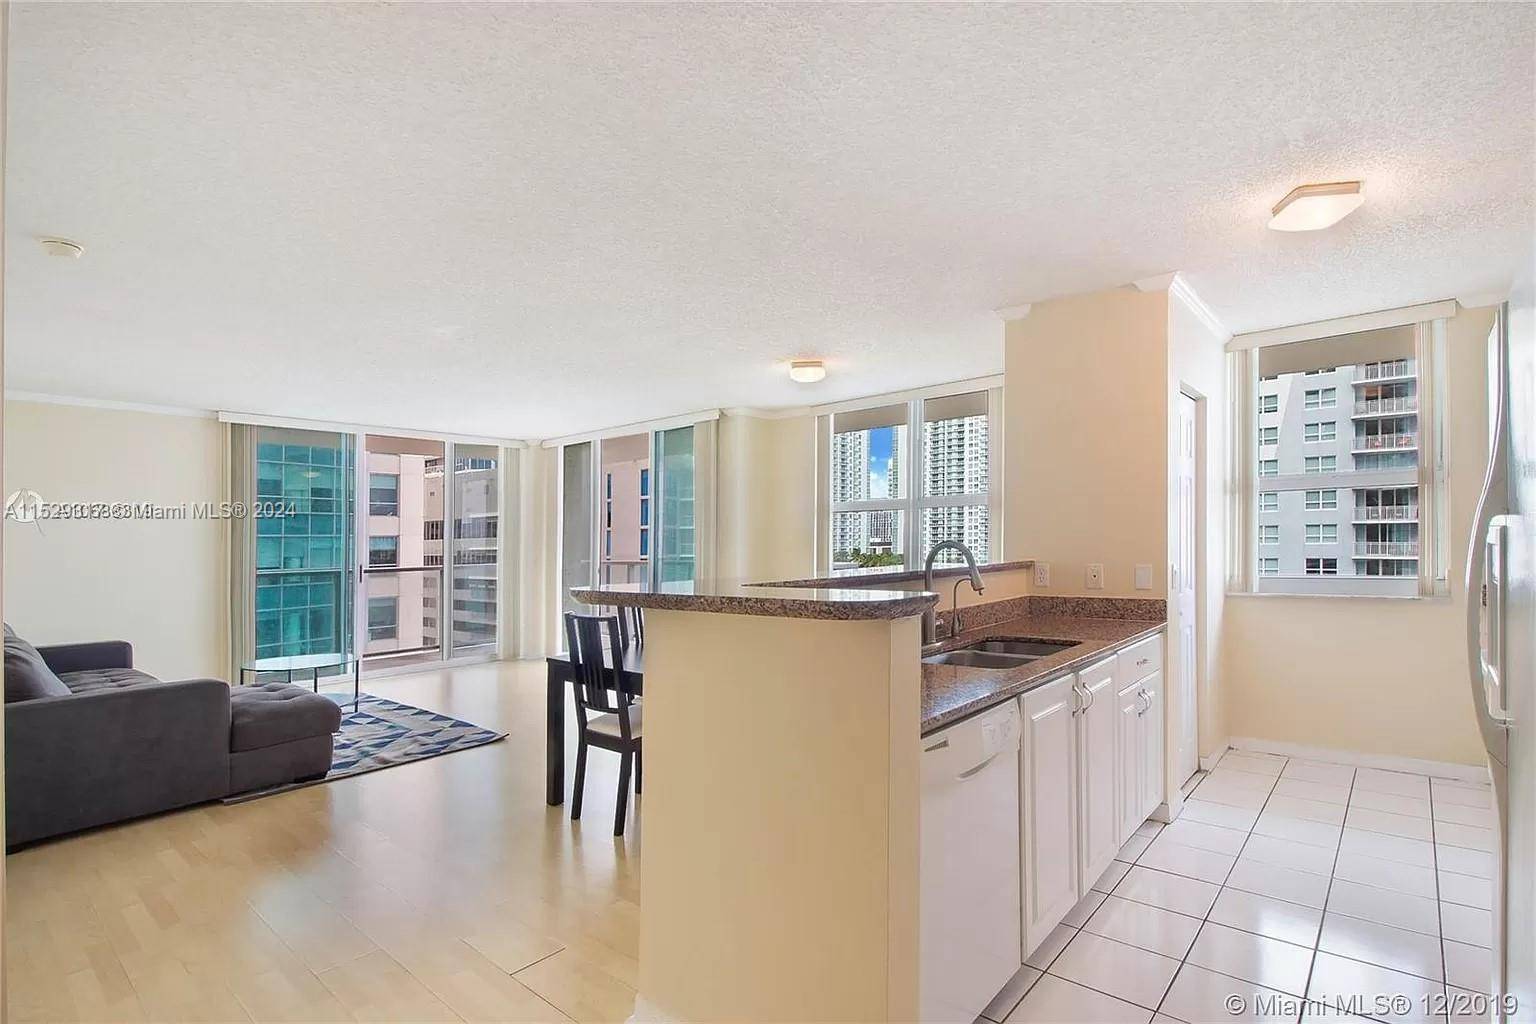 Don't miss out on this generously sized 3 bedroom, 2 bathroom residence situated in the vibrant heart of Brickell, boasting breathtaking bay views and a stunning skyline panorama from its ...